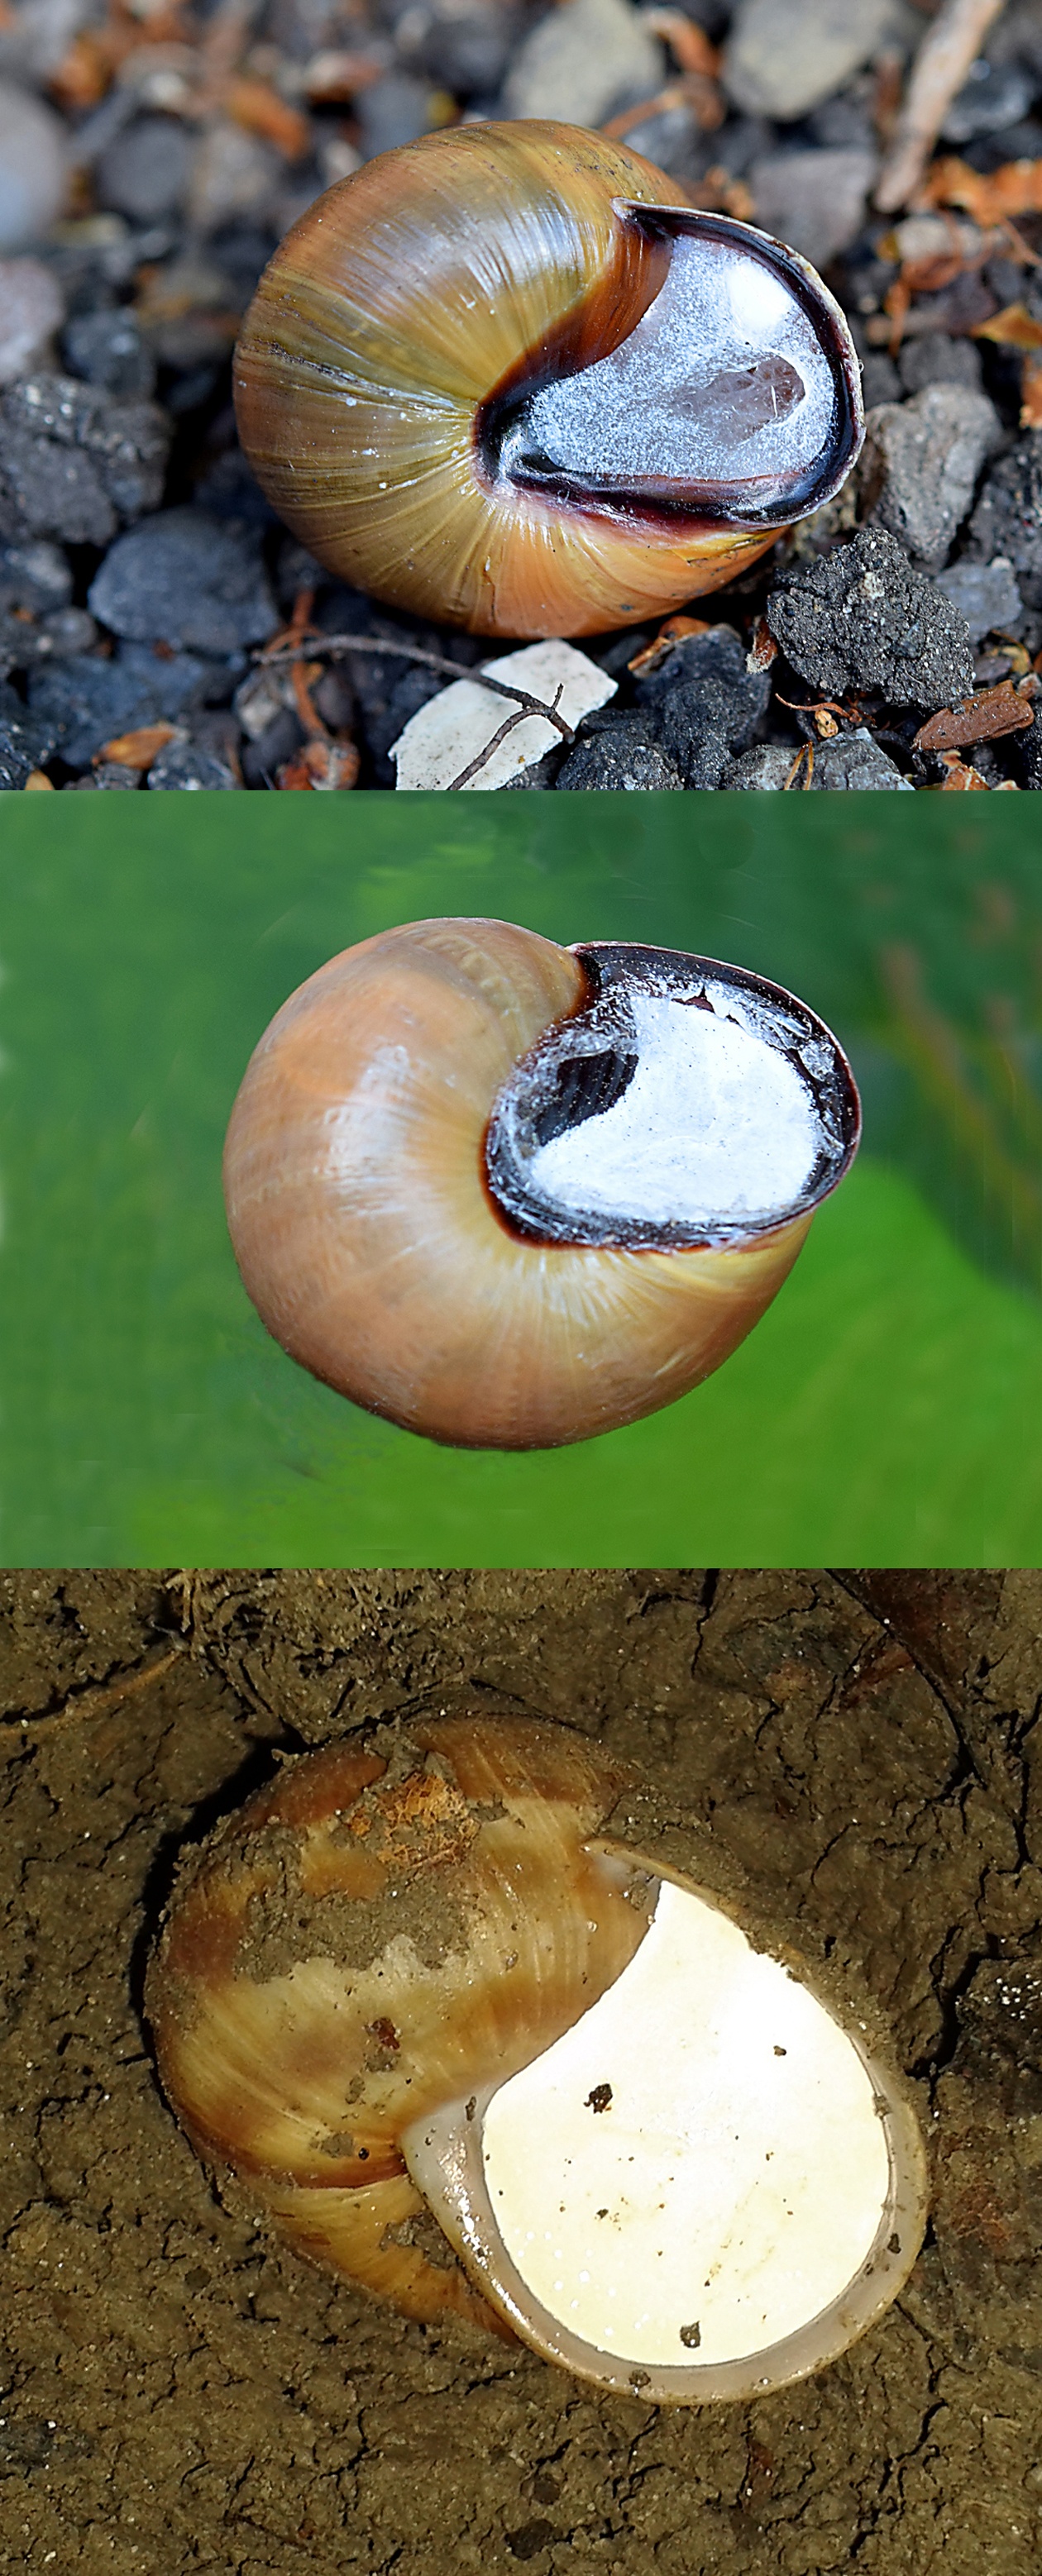 How do snails deal with winter?